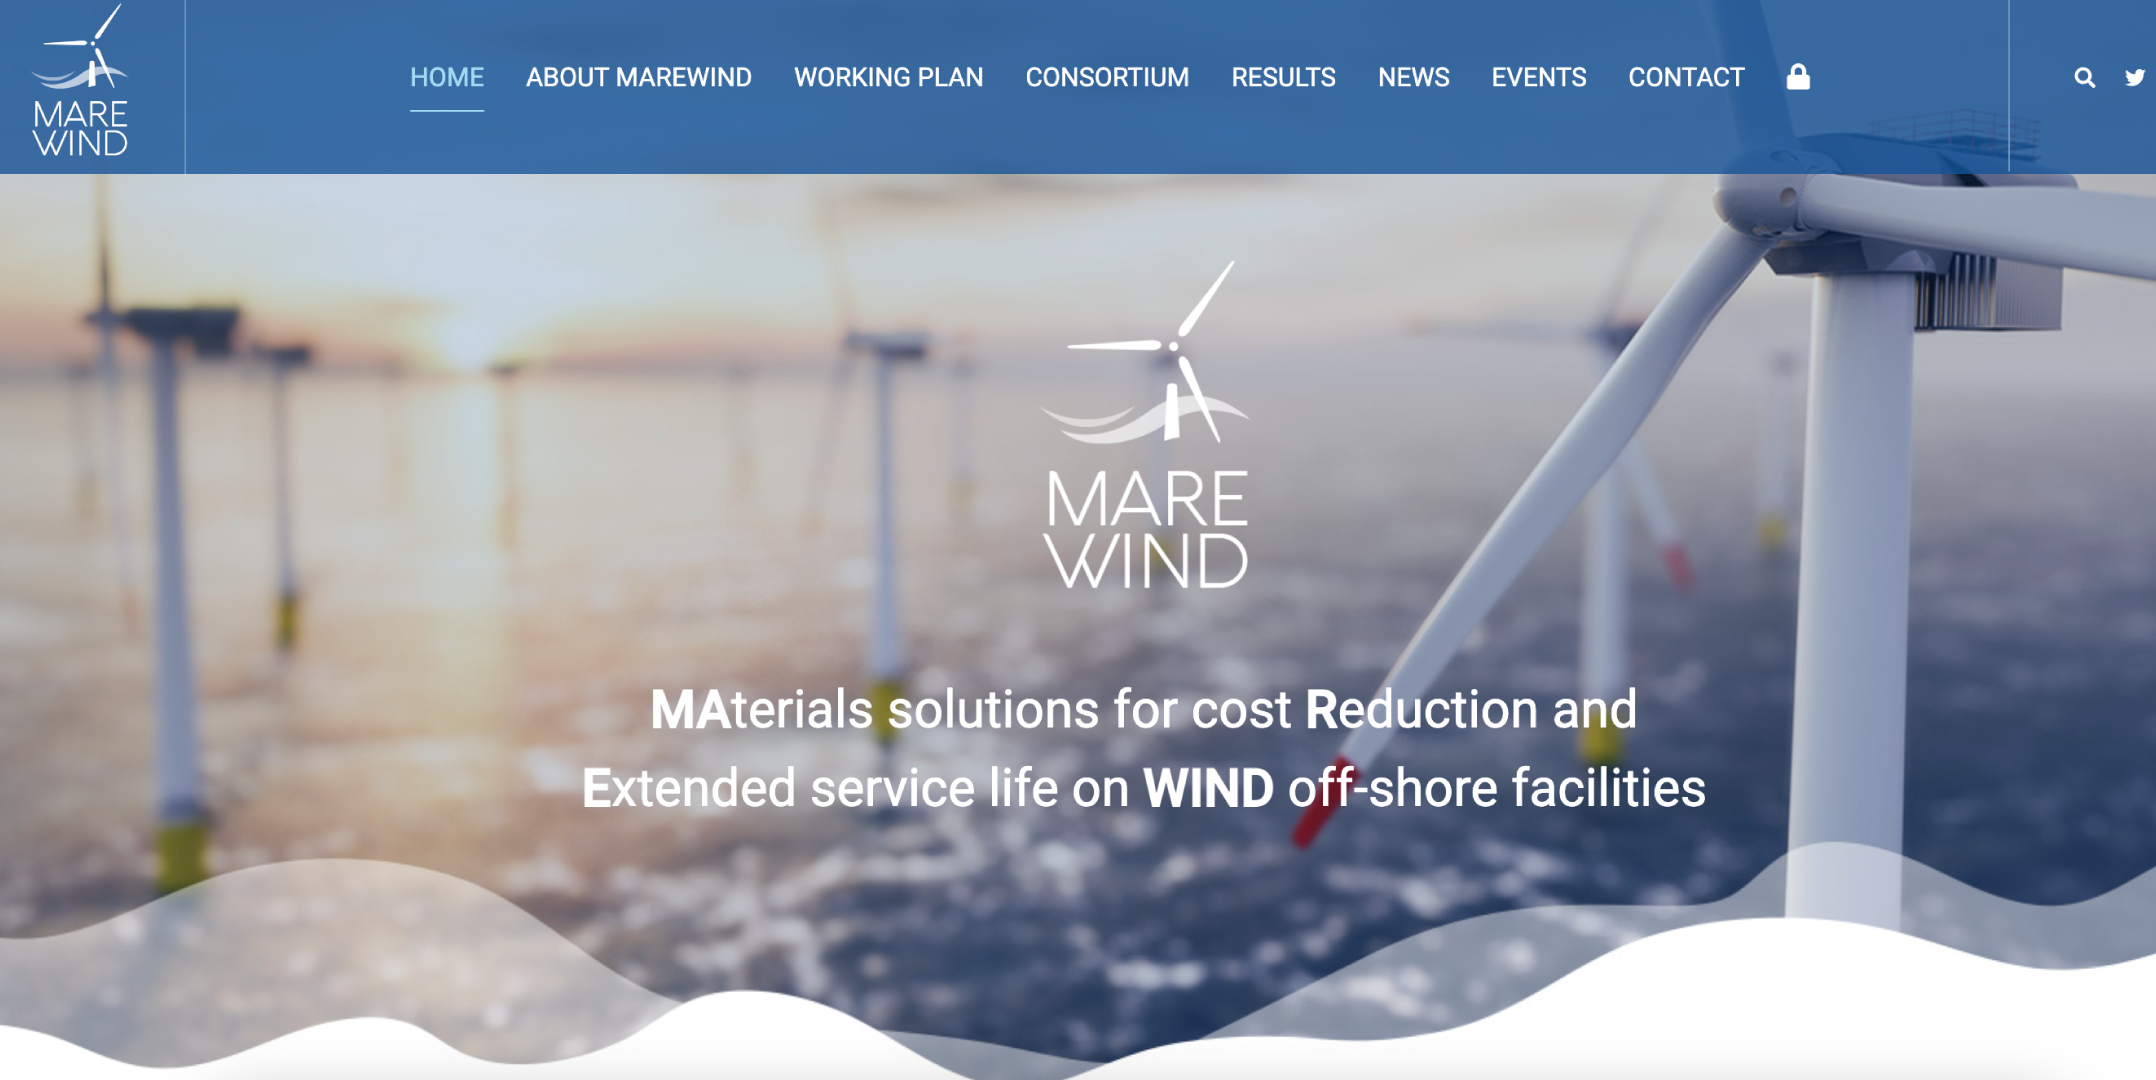 Marewind, developing durable materials and recyclable solutions for the offshore wind industry